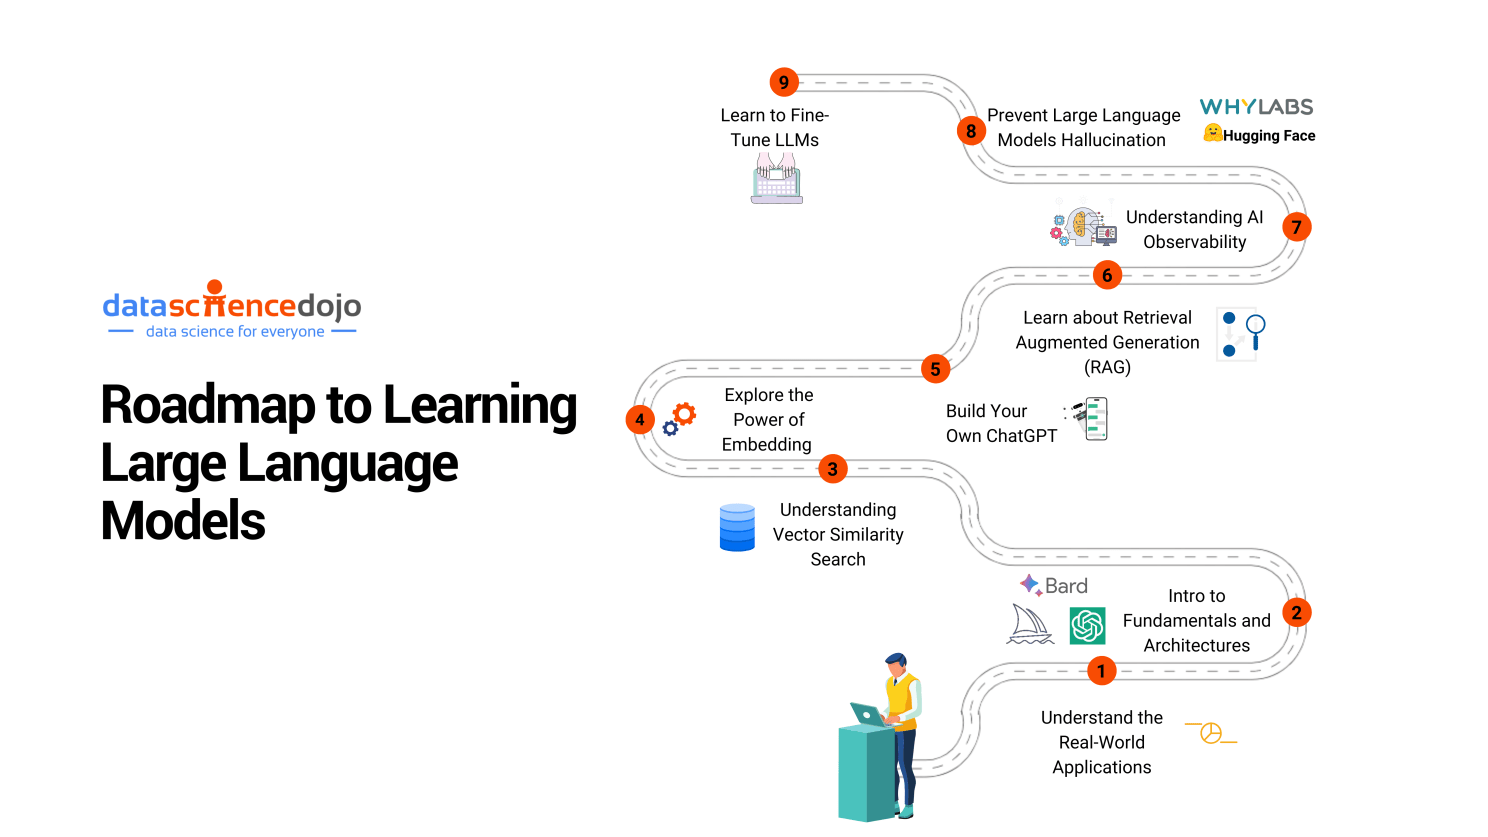 Roadmap to learn large language models